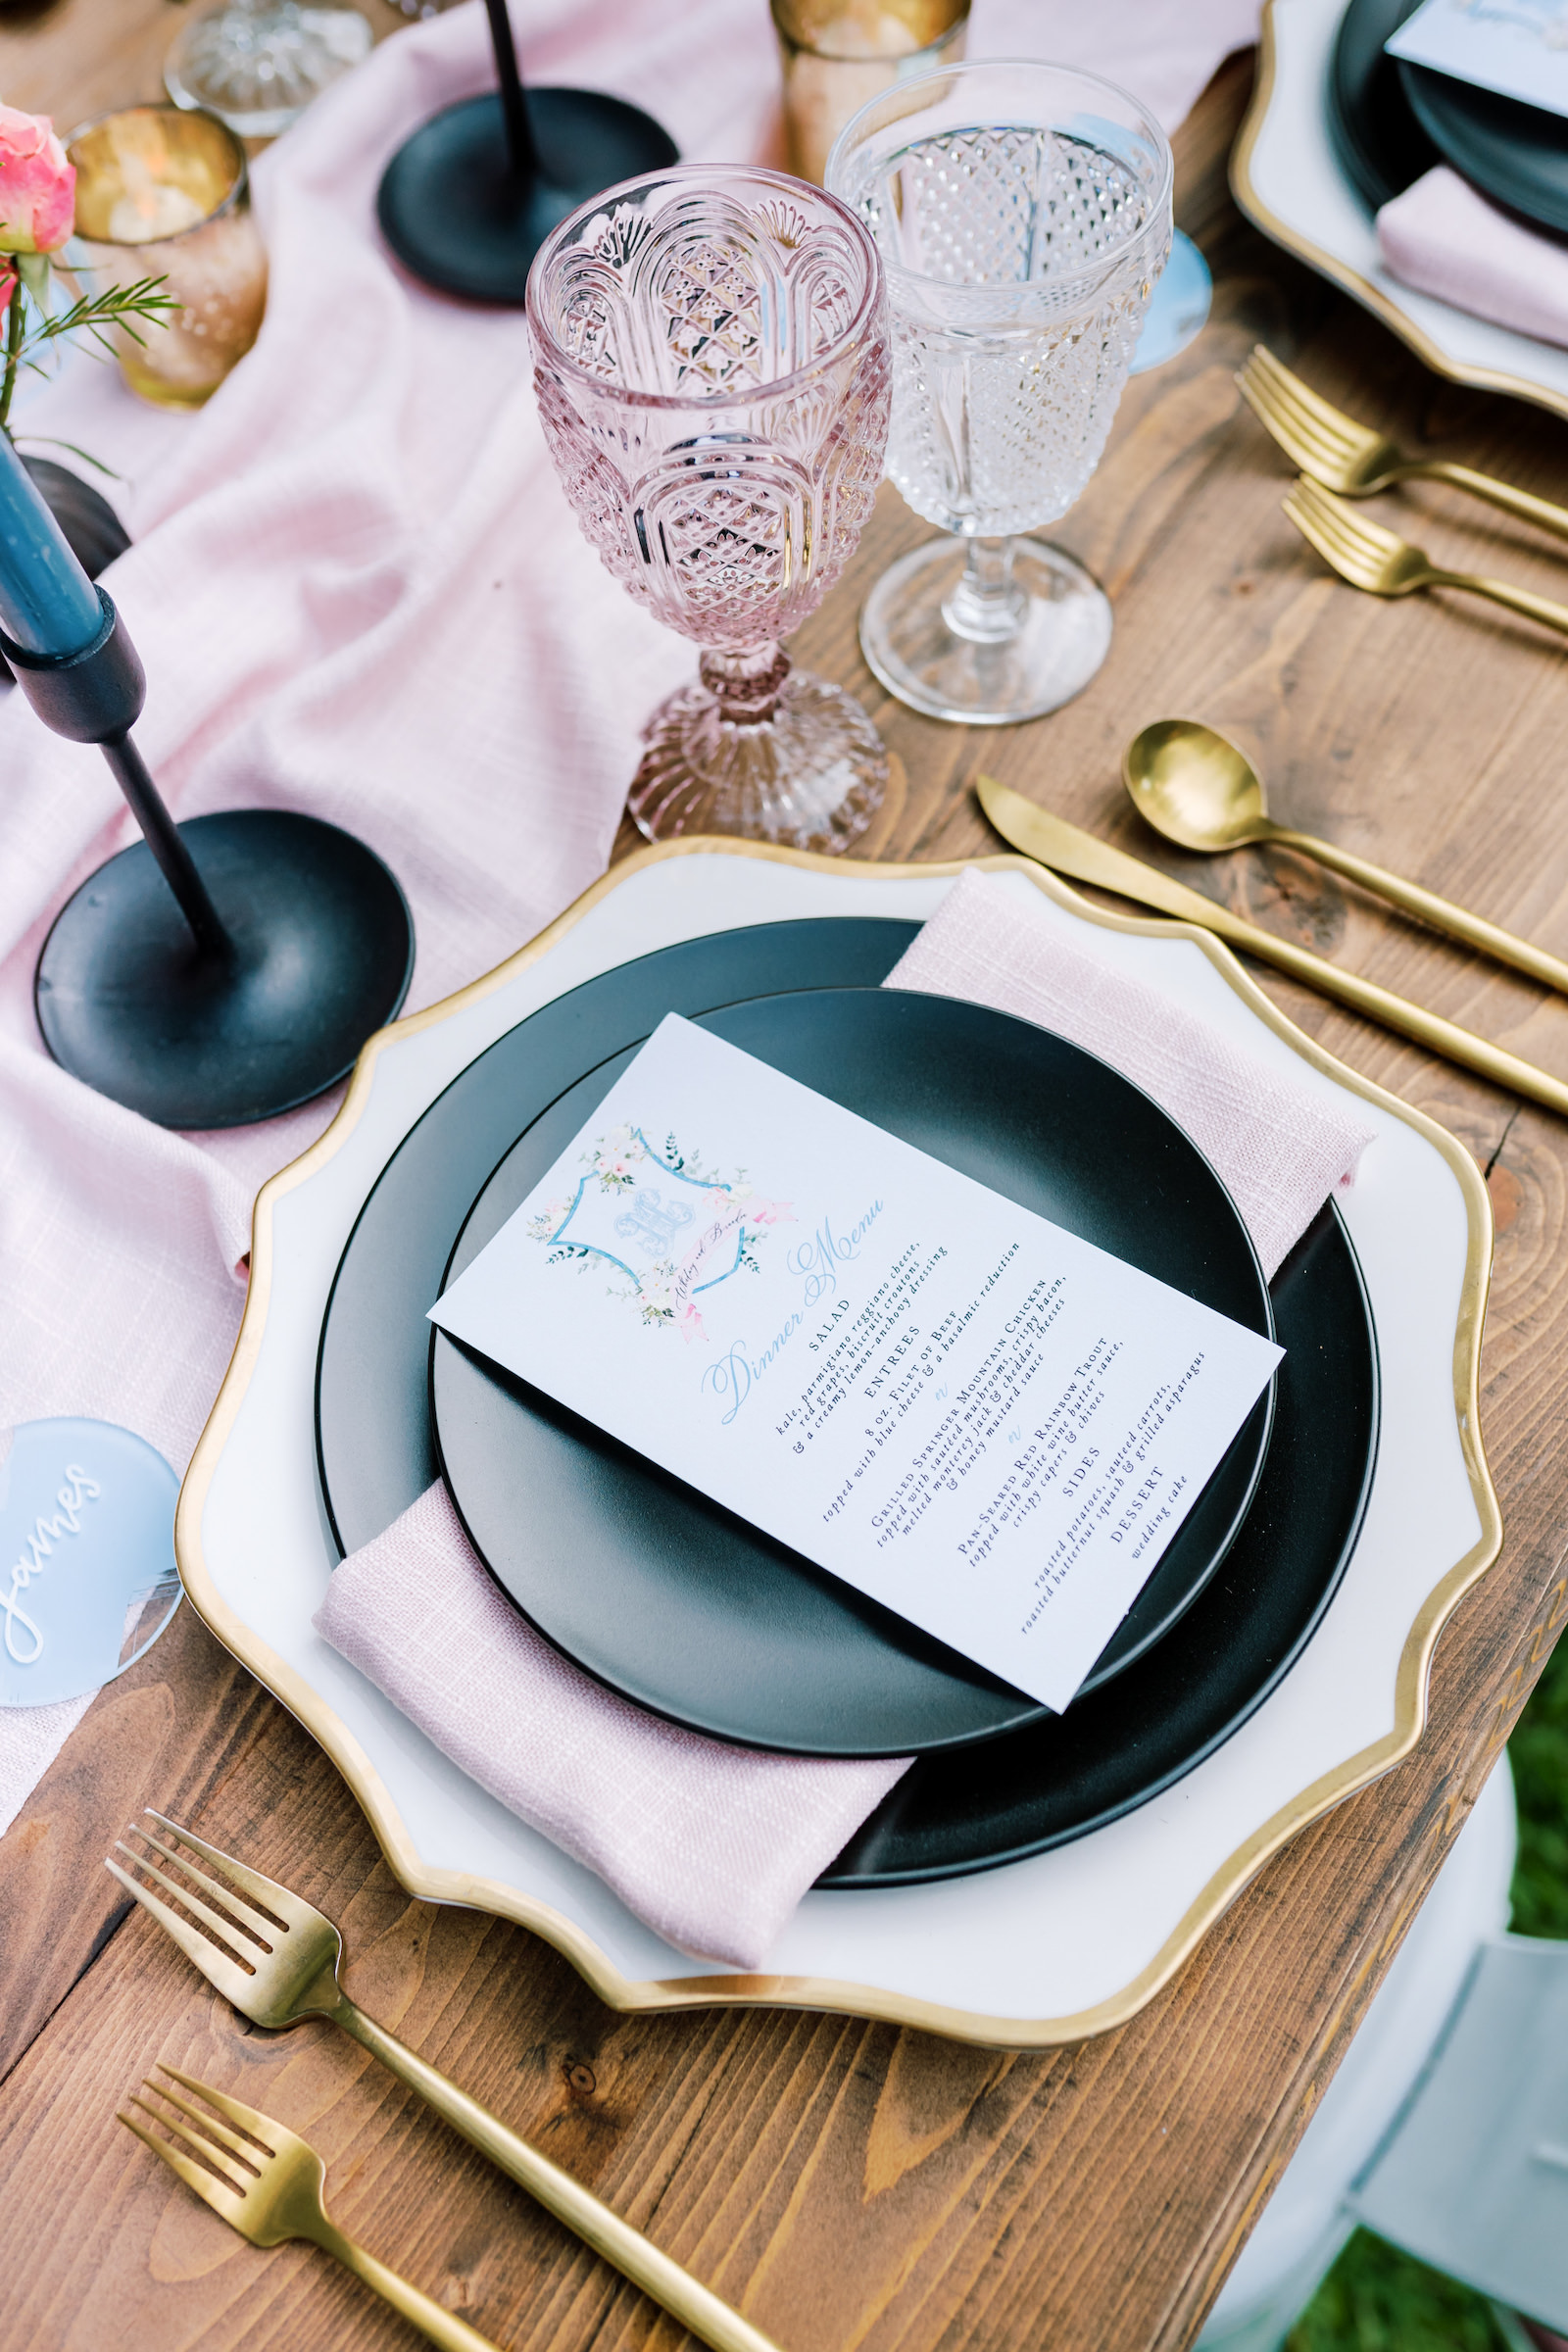 Southern Elegant Inspired Florida Outdoor Wedding Reception, Wood Table with Dark Blue Place Setting, Gold Flatware, Pink Burlap Linens, Multicolored Glass Goblets, Floral Centerpiece with Magnolia Leaves | Tampa Bay Wedding Planner EventFull Weddings | Florida Wedding Rentals Over The Top Linens